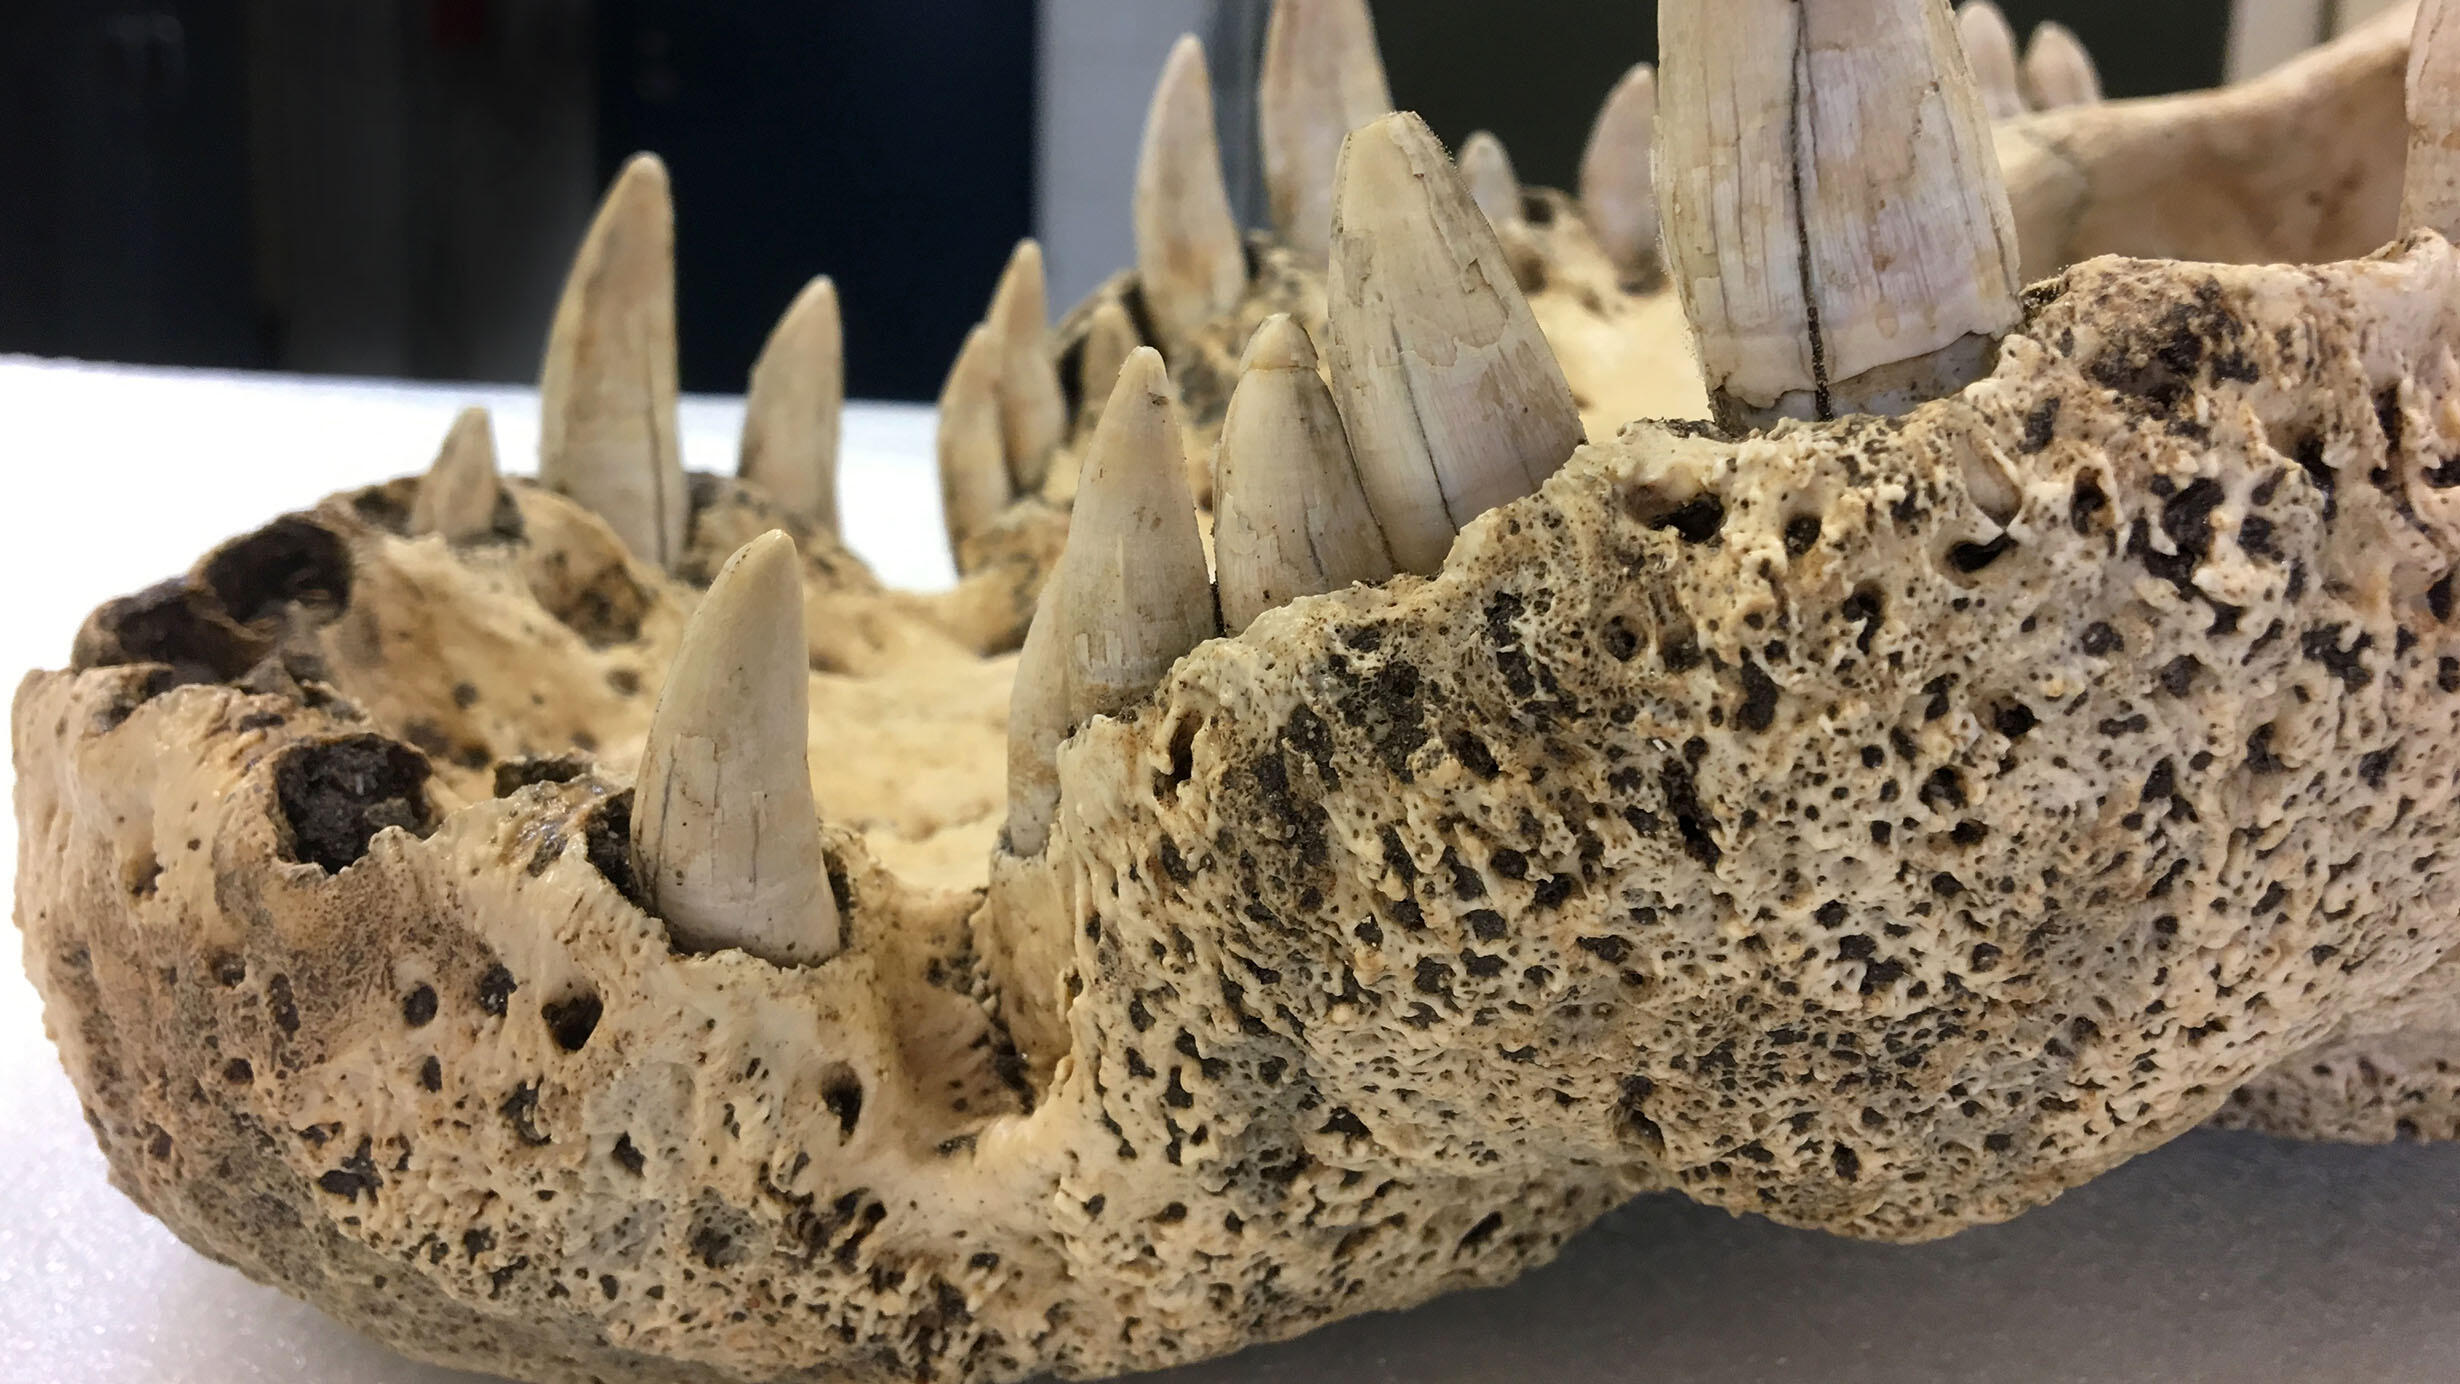 Close up of the teeth on the jaw of an extinct horned crocodile (Voay robustus) specimen.